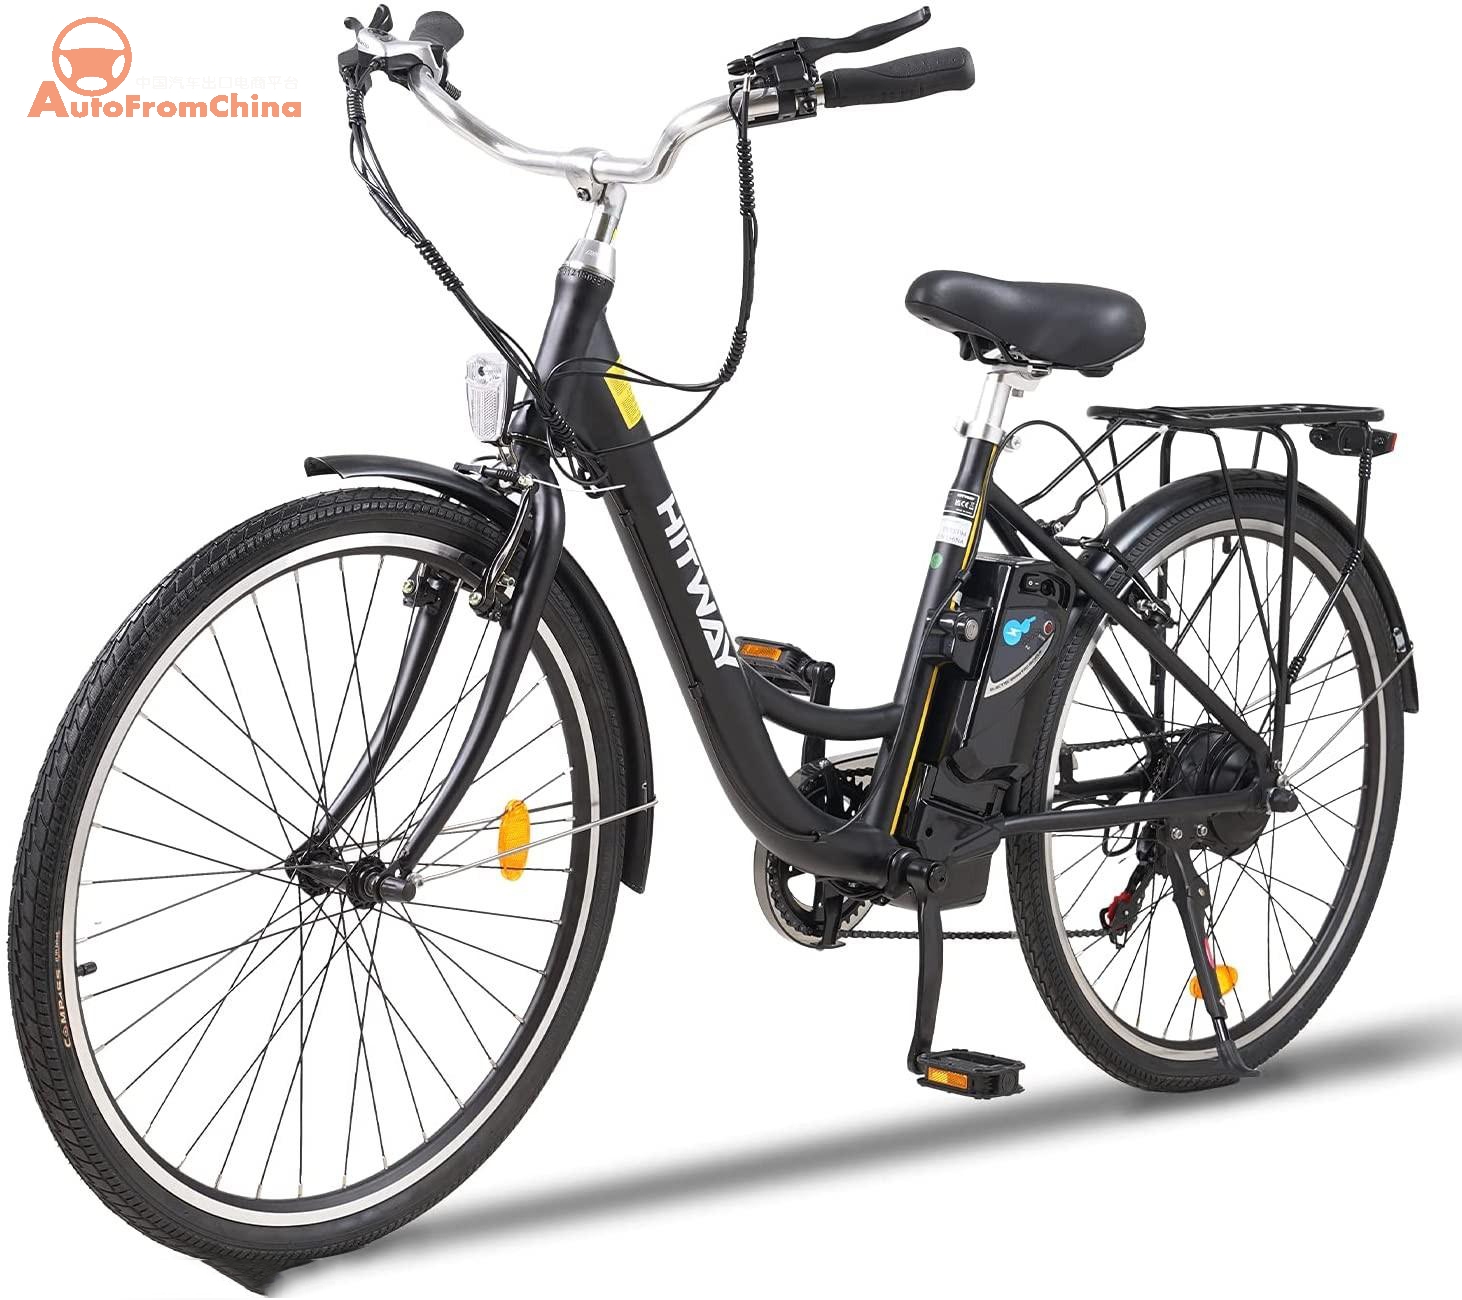 E-Bike009 26 inch Electric Bike with 250W Motor 7 Speed Modes, e-Bike with Removable Lithium Battery 36V 10.4AH 50km